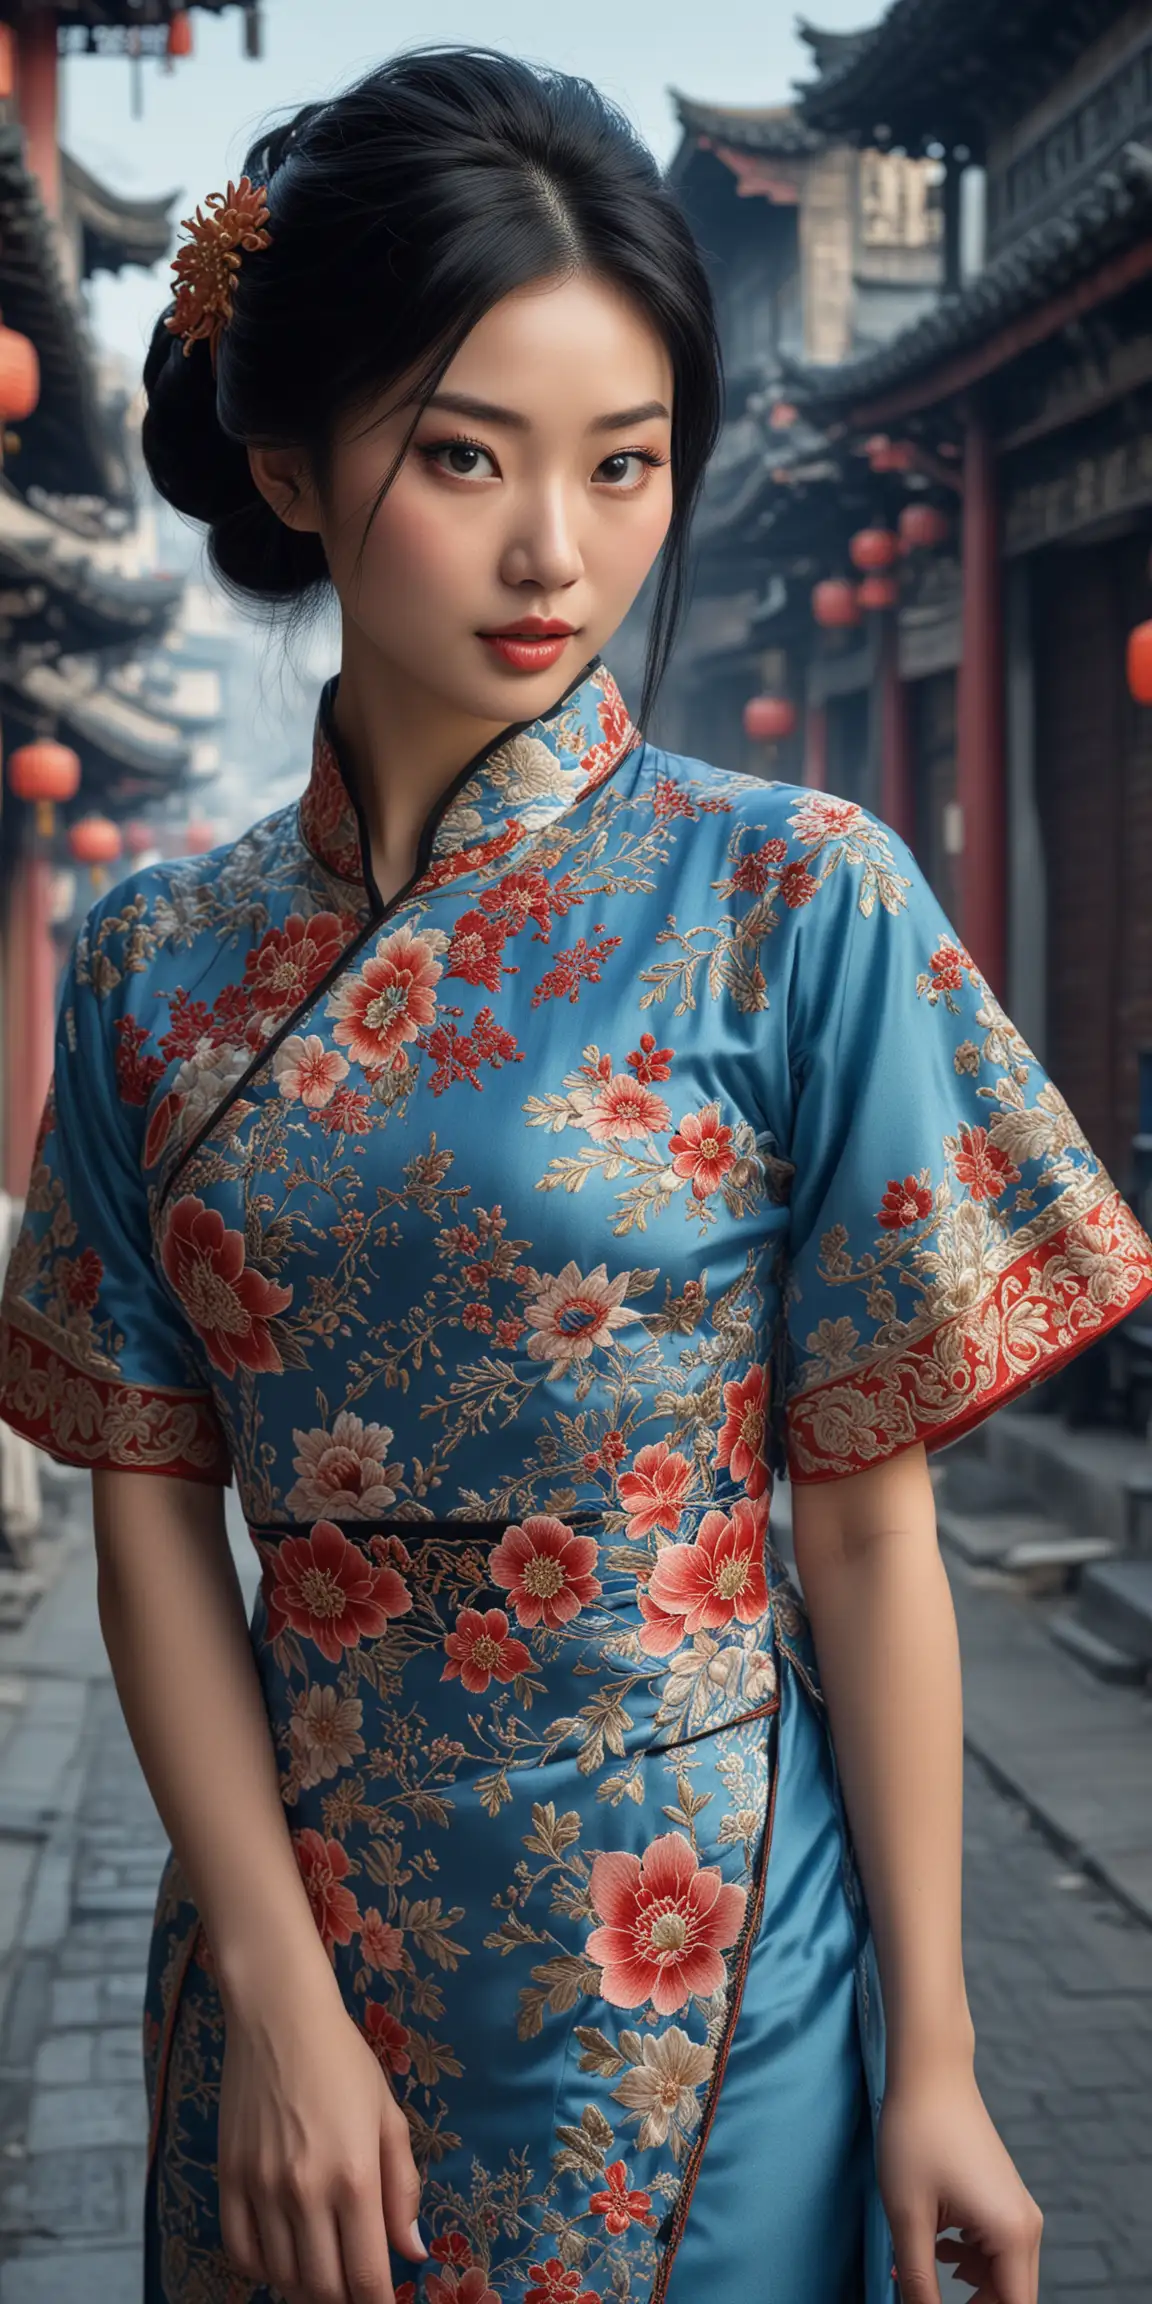 Captivating Chinese Woman in Scarlet Qipao with Azure Gaze